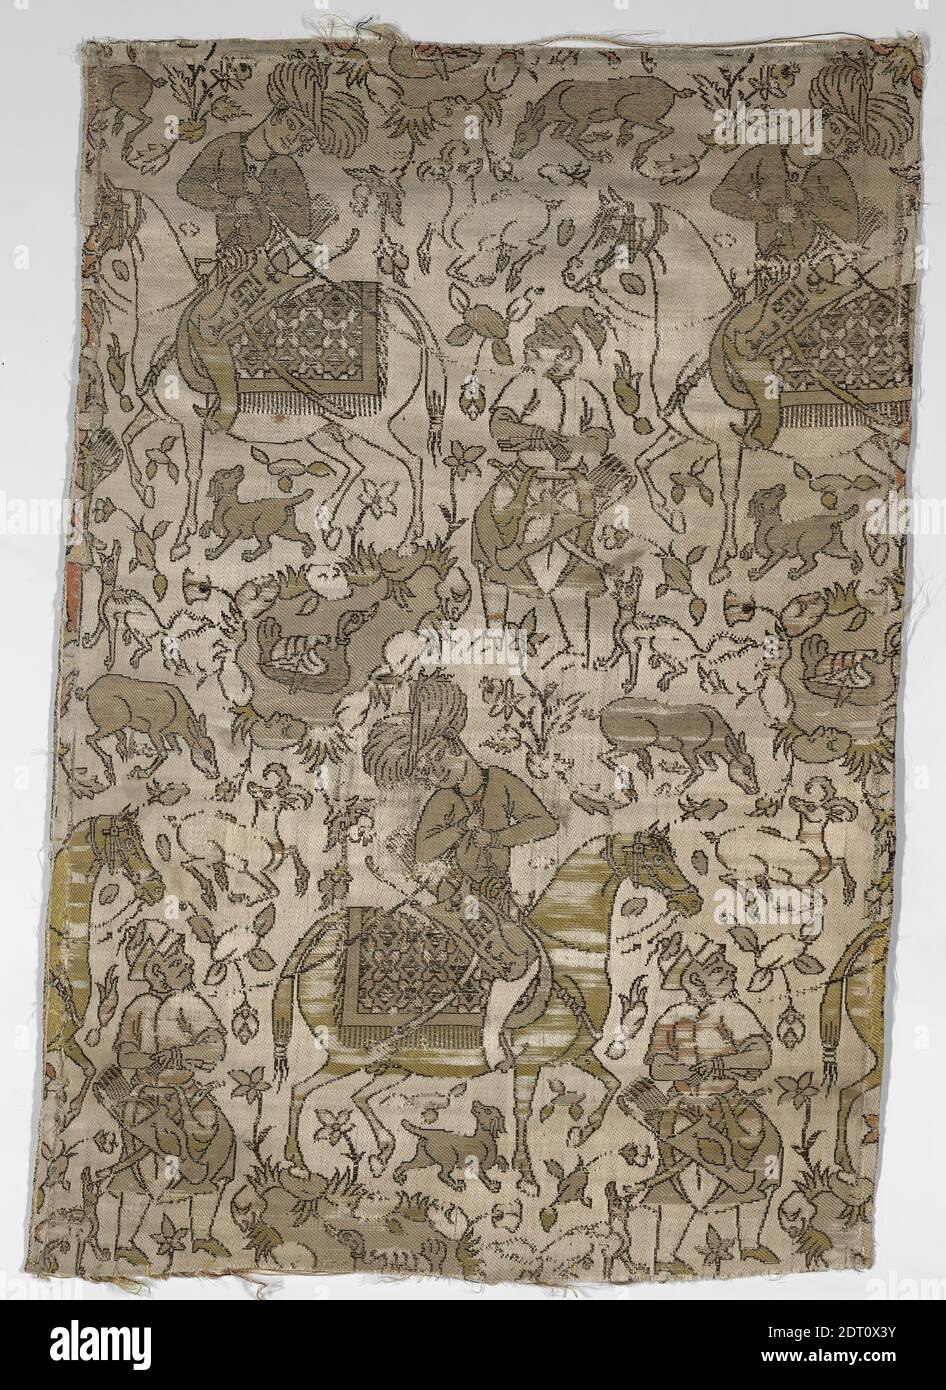 Artist: Abdallah, active 17th century, Textile Fragment with a Courtier and Prisoner, early 17th century, Silk; compound weave, 13 11/16 × 20 1/16 in. (34.7 × 51 cm), This silk fragment depicts a smartly dressed courtier on horseback accompanied by a prisoner on foot, a motif that became popular in both paintings and textiles in sixteenth-century Iran. Various animals and lush vegetation surround the pair. The artist’s signature is conspicuously placed on the quiver of the idealized rider; it reads, Work of ‘Abd Allah., Iranian/Persian, Islamic, Safavid dynasty (1501–1722), Textiles Stock Photo